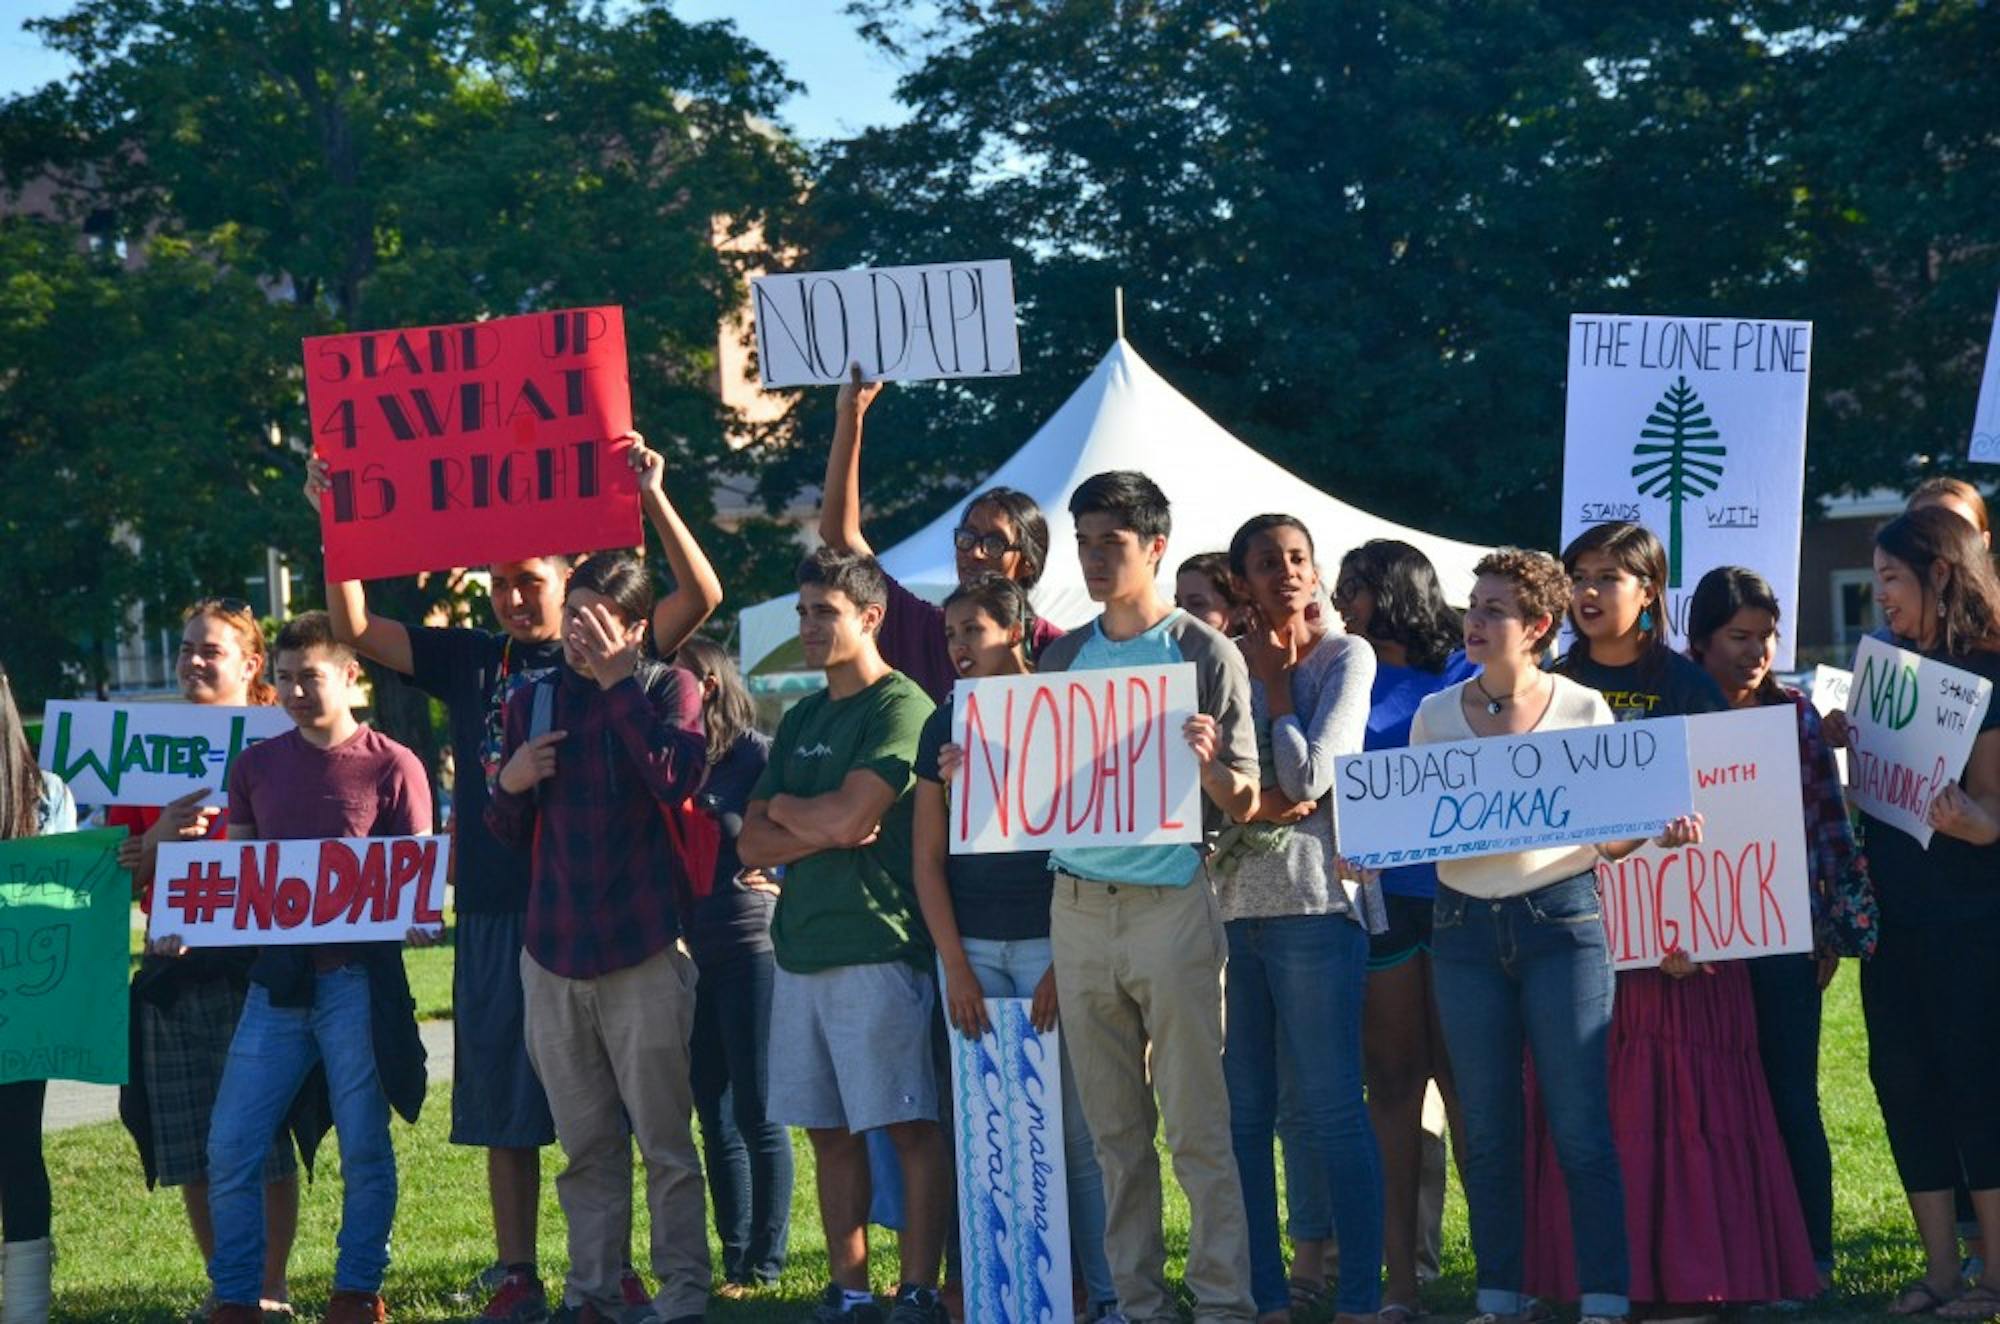 Students gather on the green to protest the Dakota Access Pipeline.